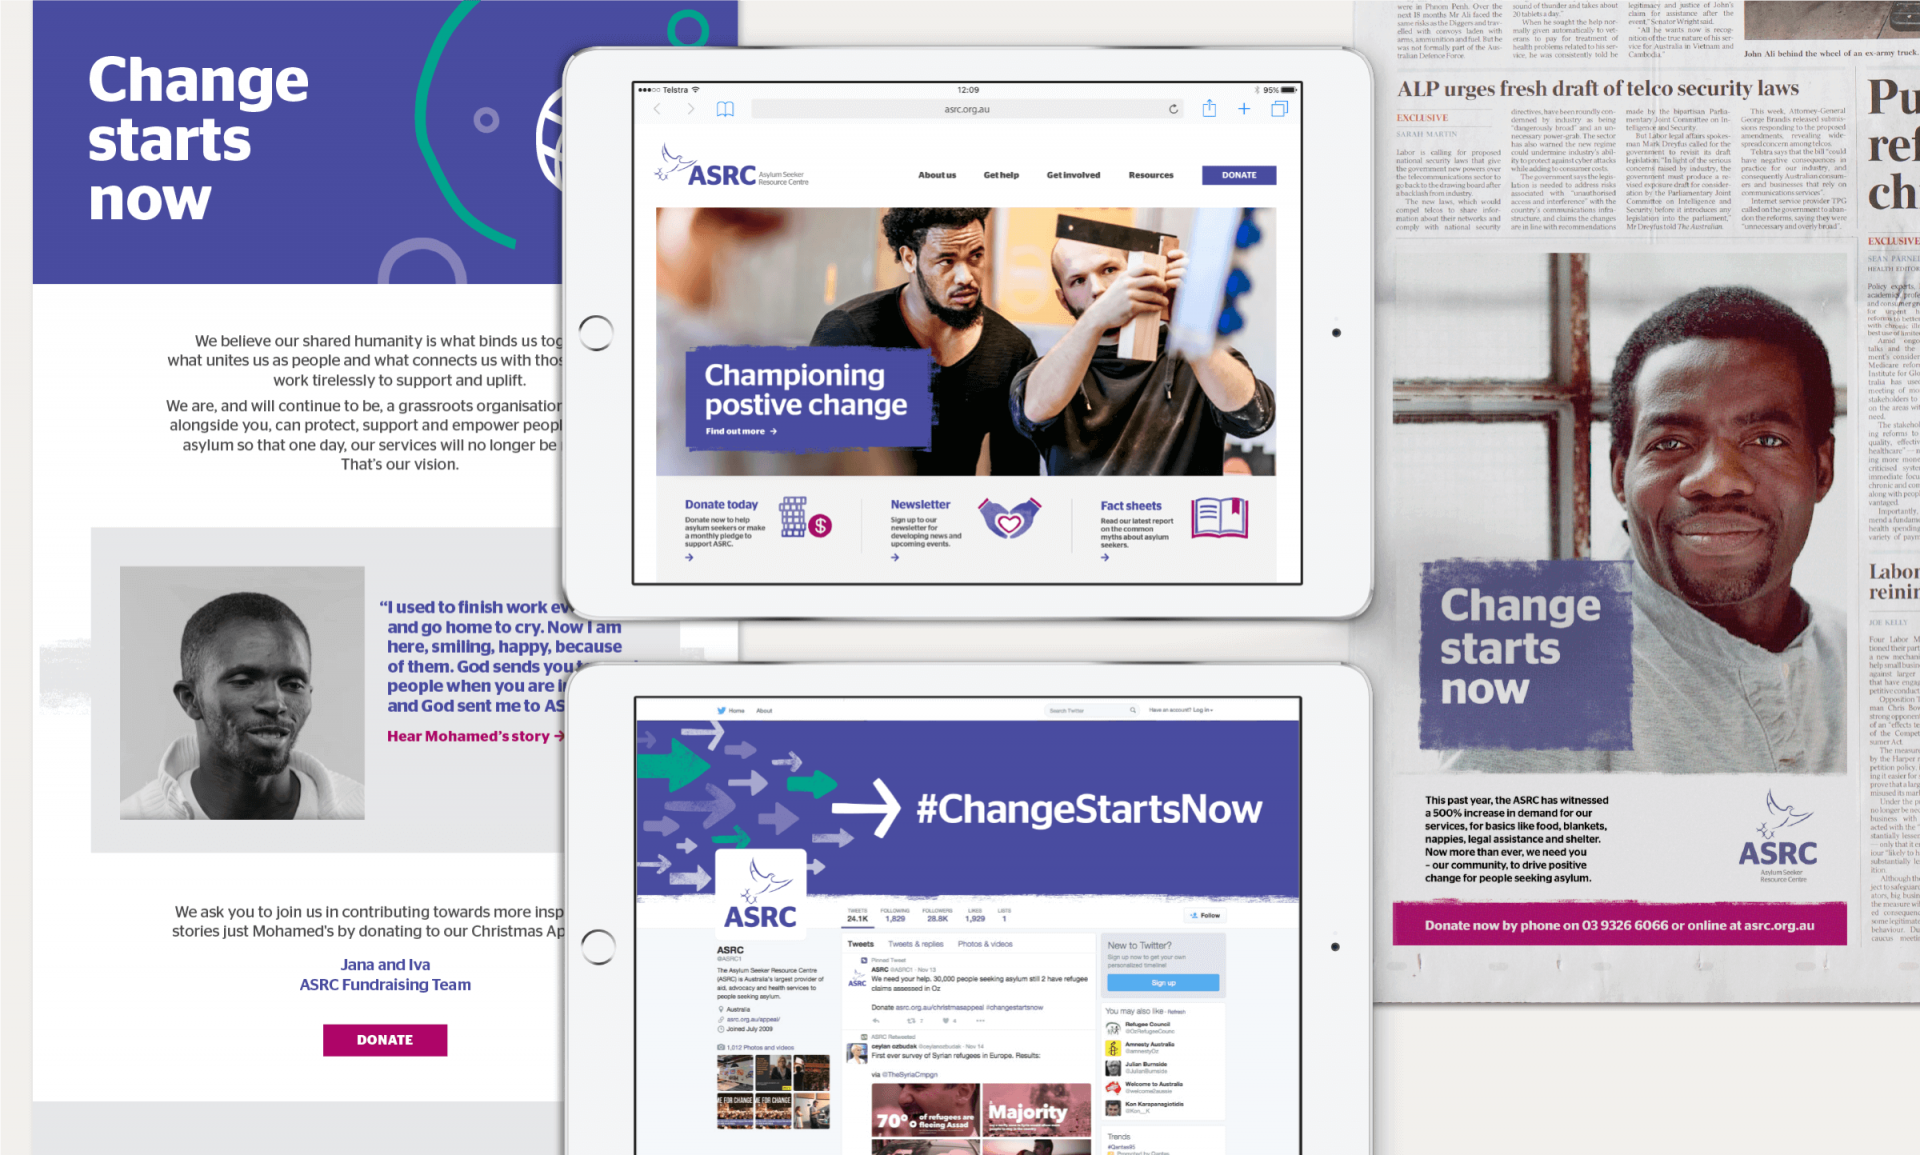 Collateral for the Change Starts Now campaign, including website banners, newspaper ads and a twitter account